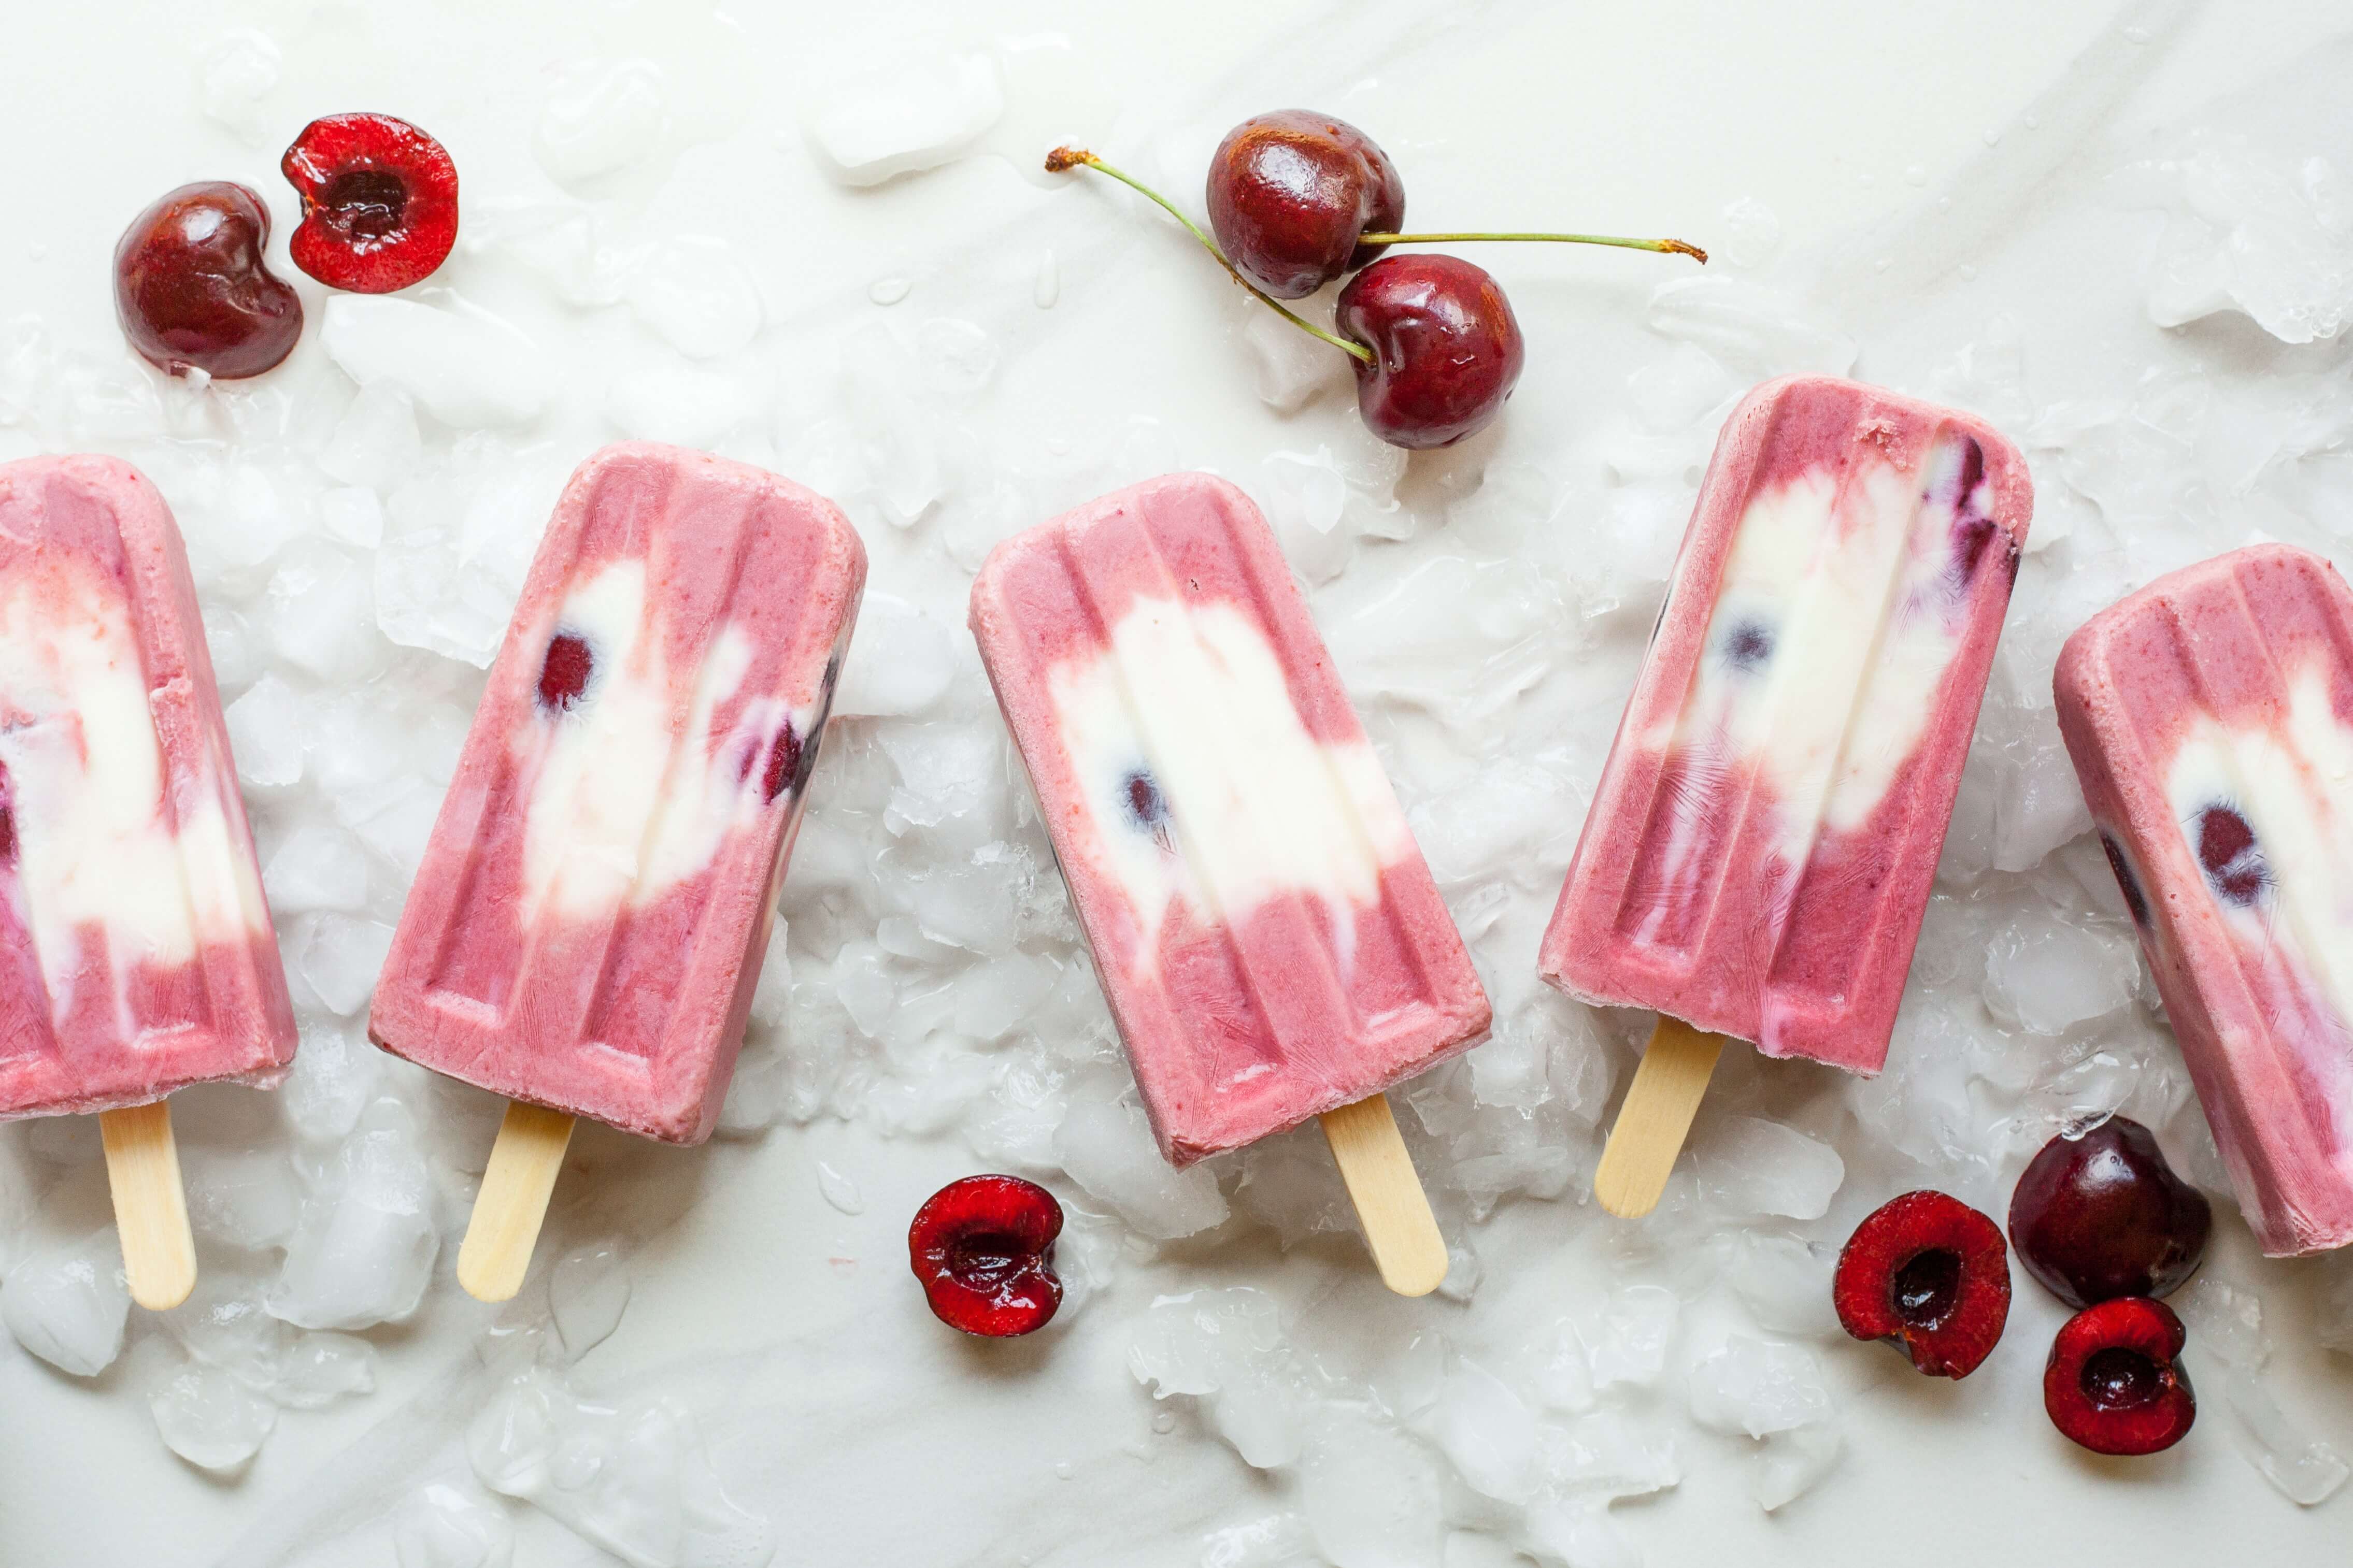 Hosting an ice cream party? These are the gadgets you need. - Reviewed